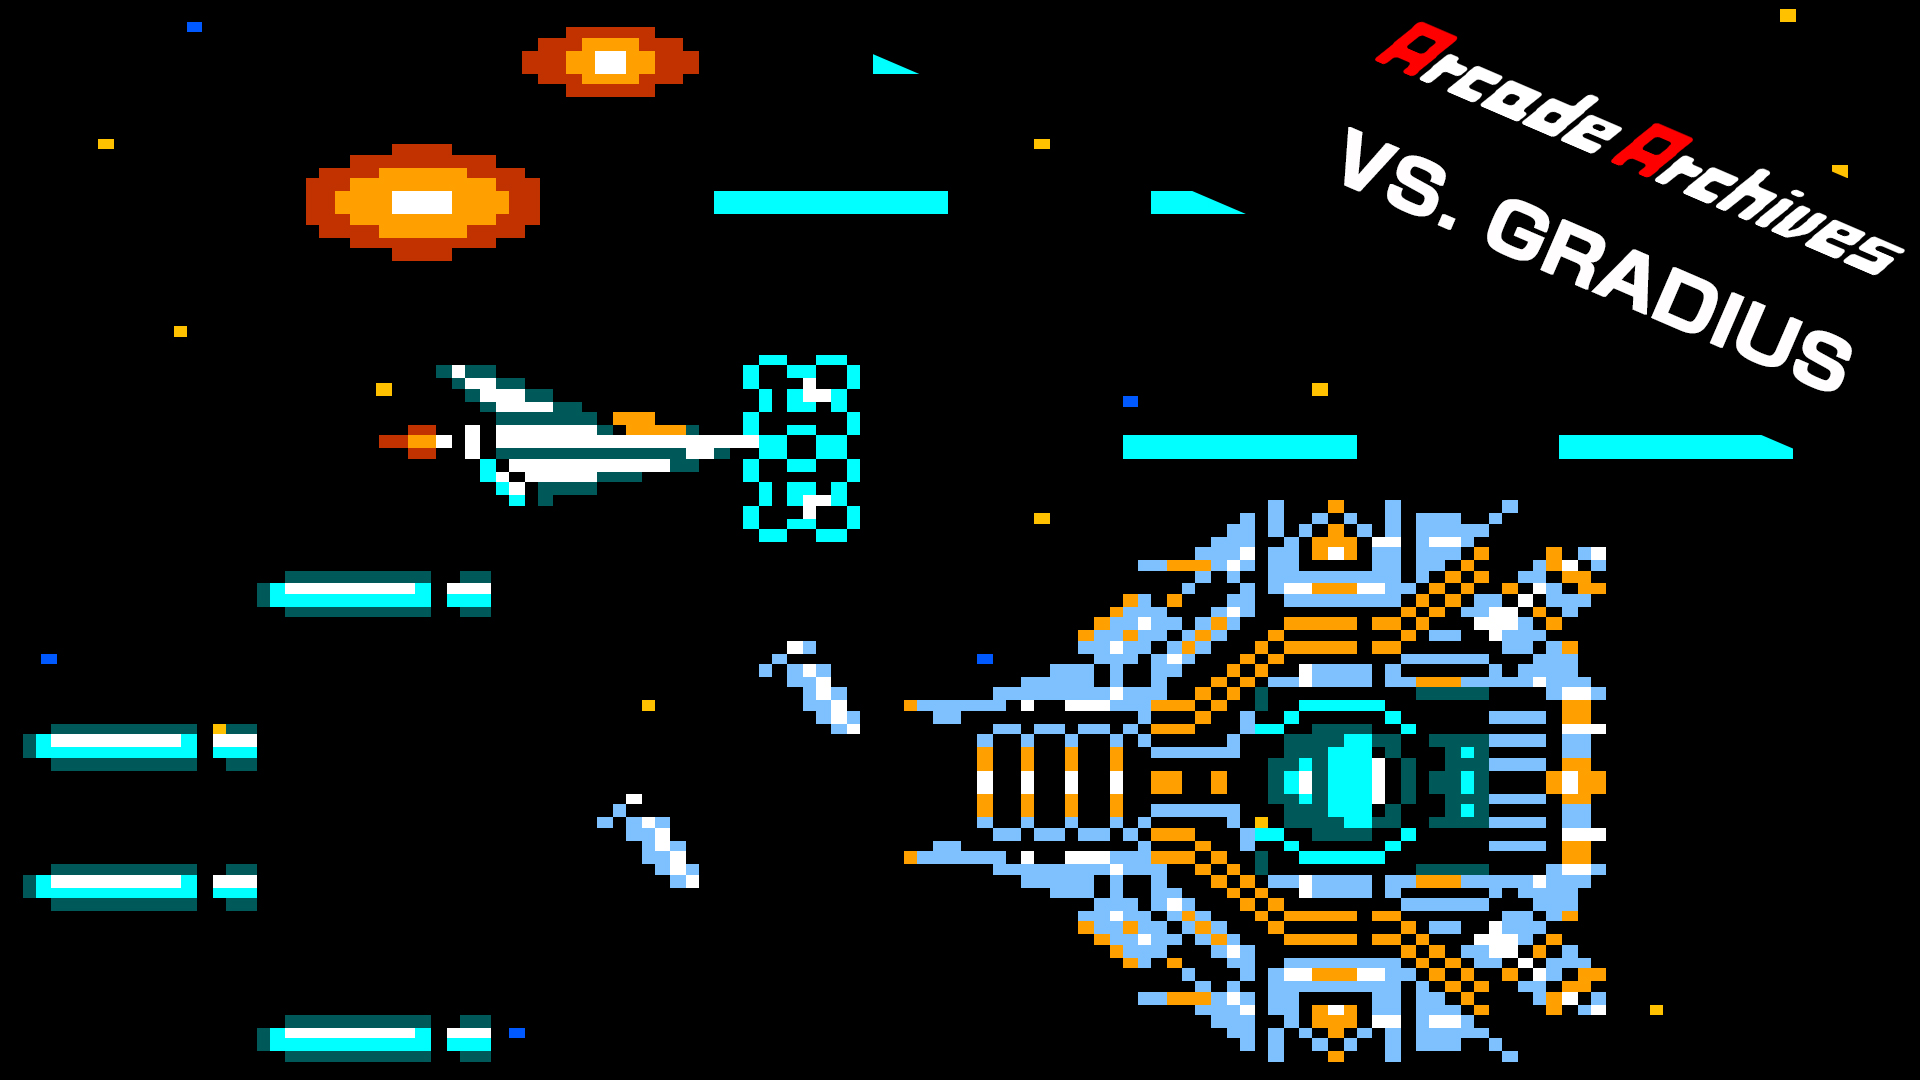 Arcade Archives VS. GRADIUS for Nintendo Switch Game Details